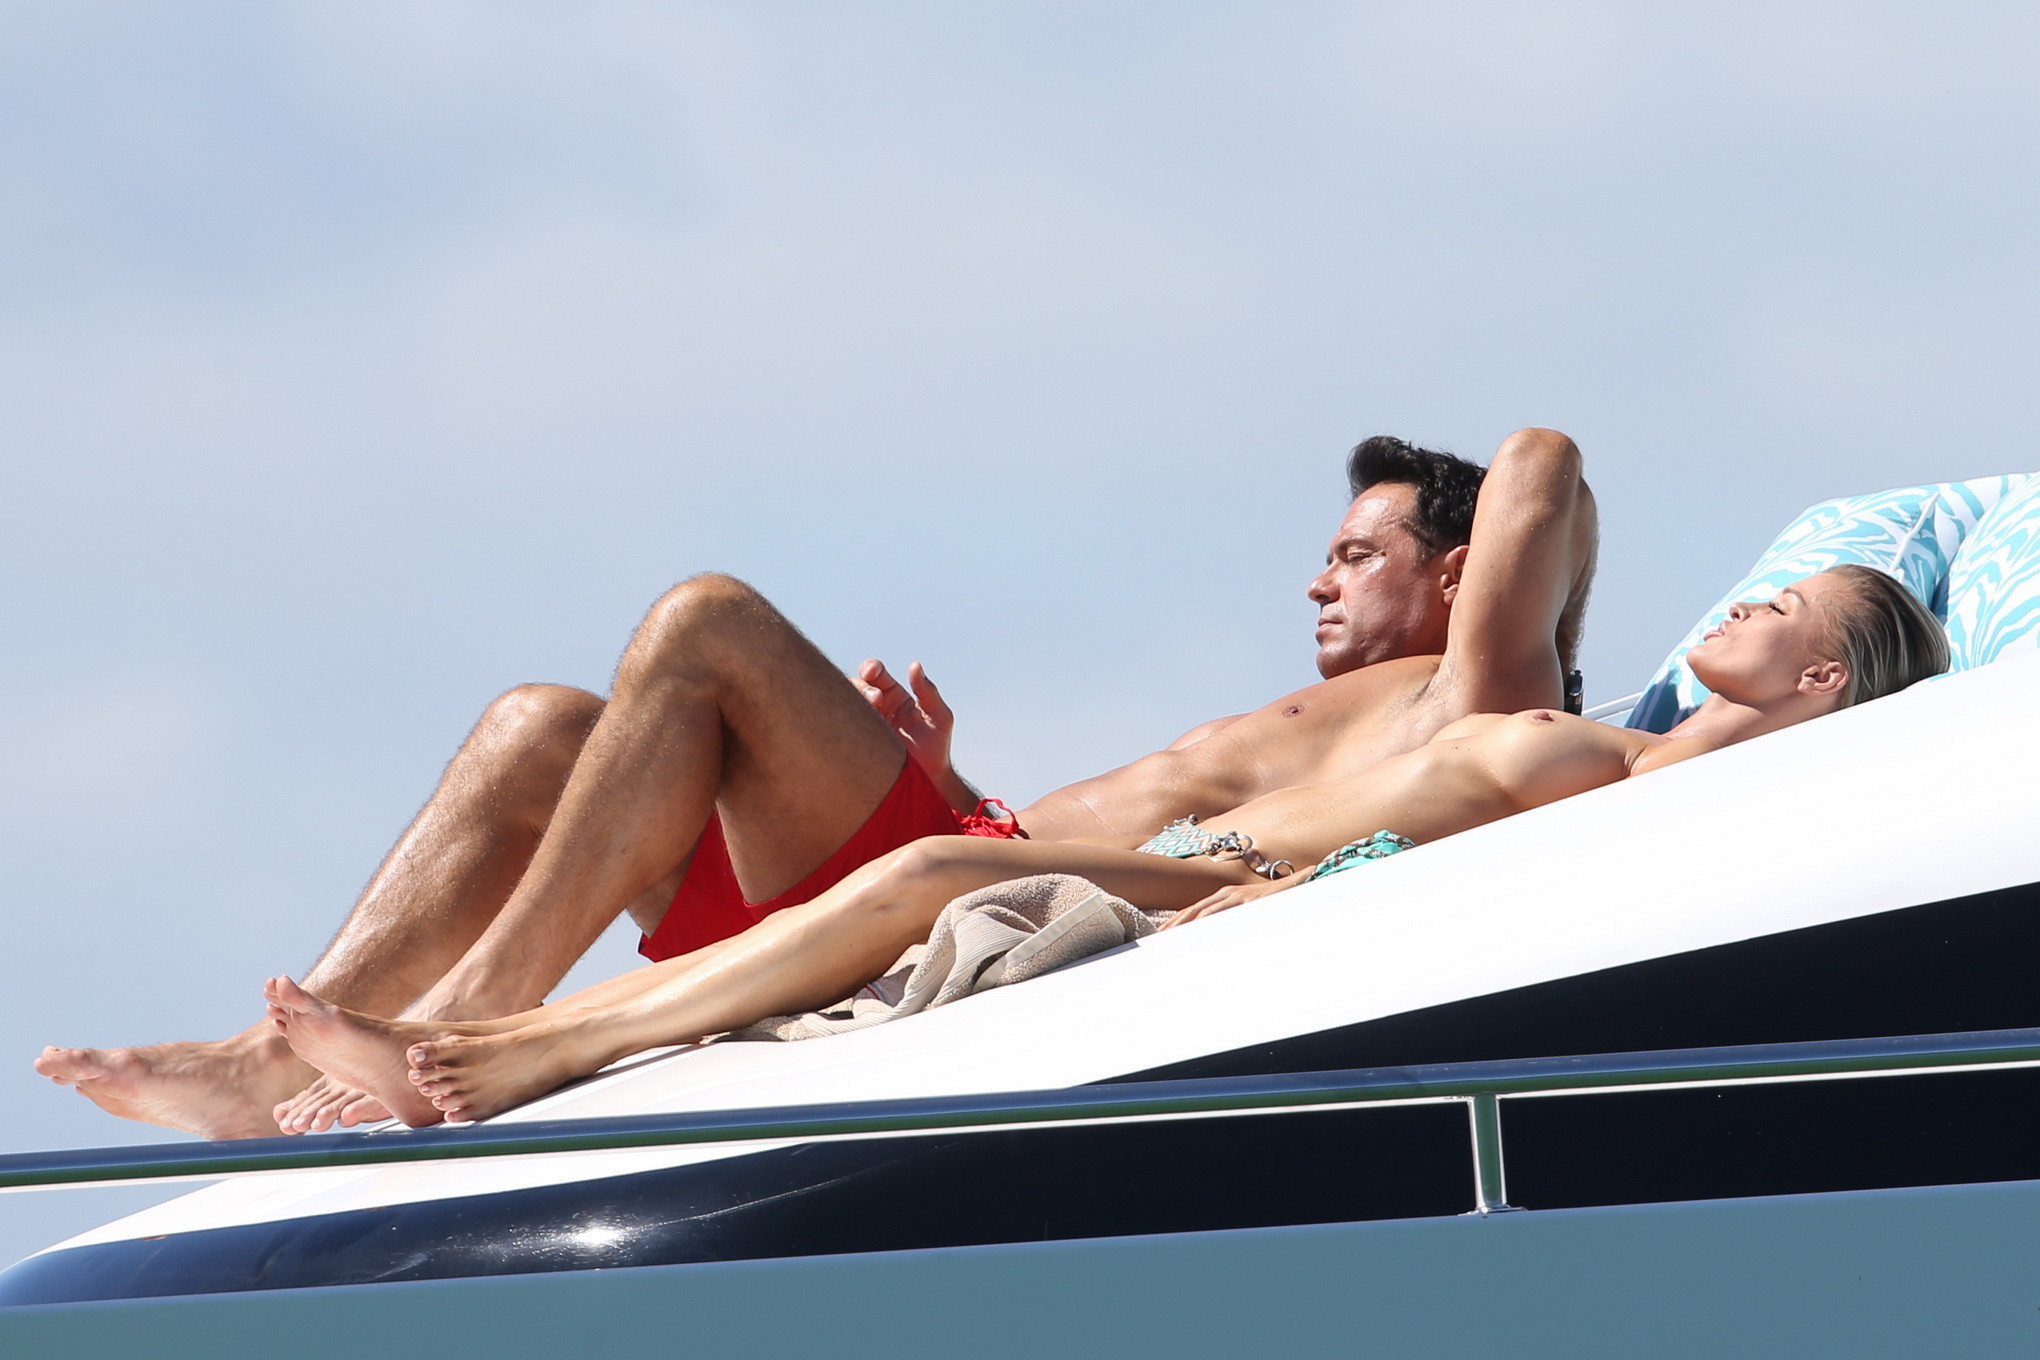 Joanna Krupa tanning topless at the yacht in Miami